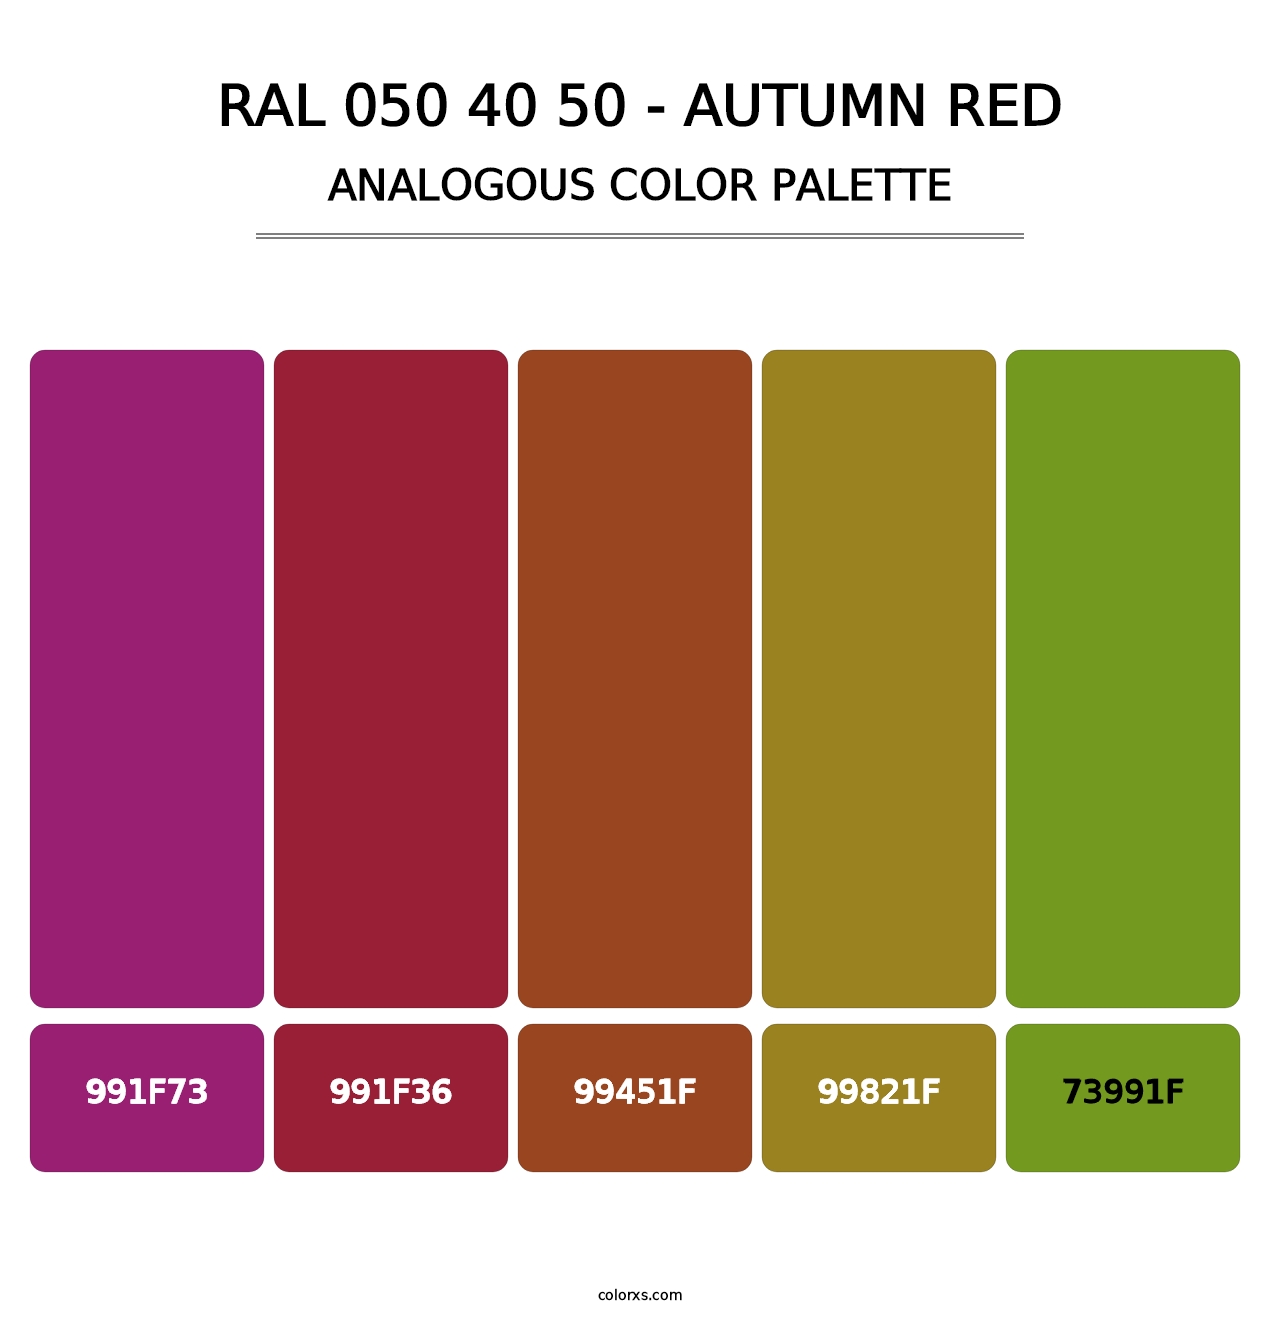 RAL 050 40 50 - Autumn Red - Analogous Color Palette